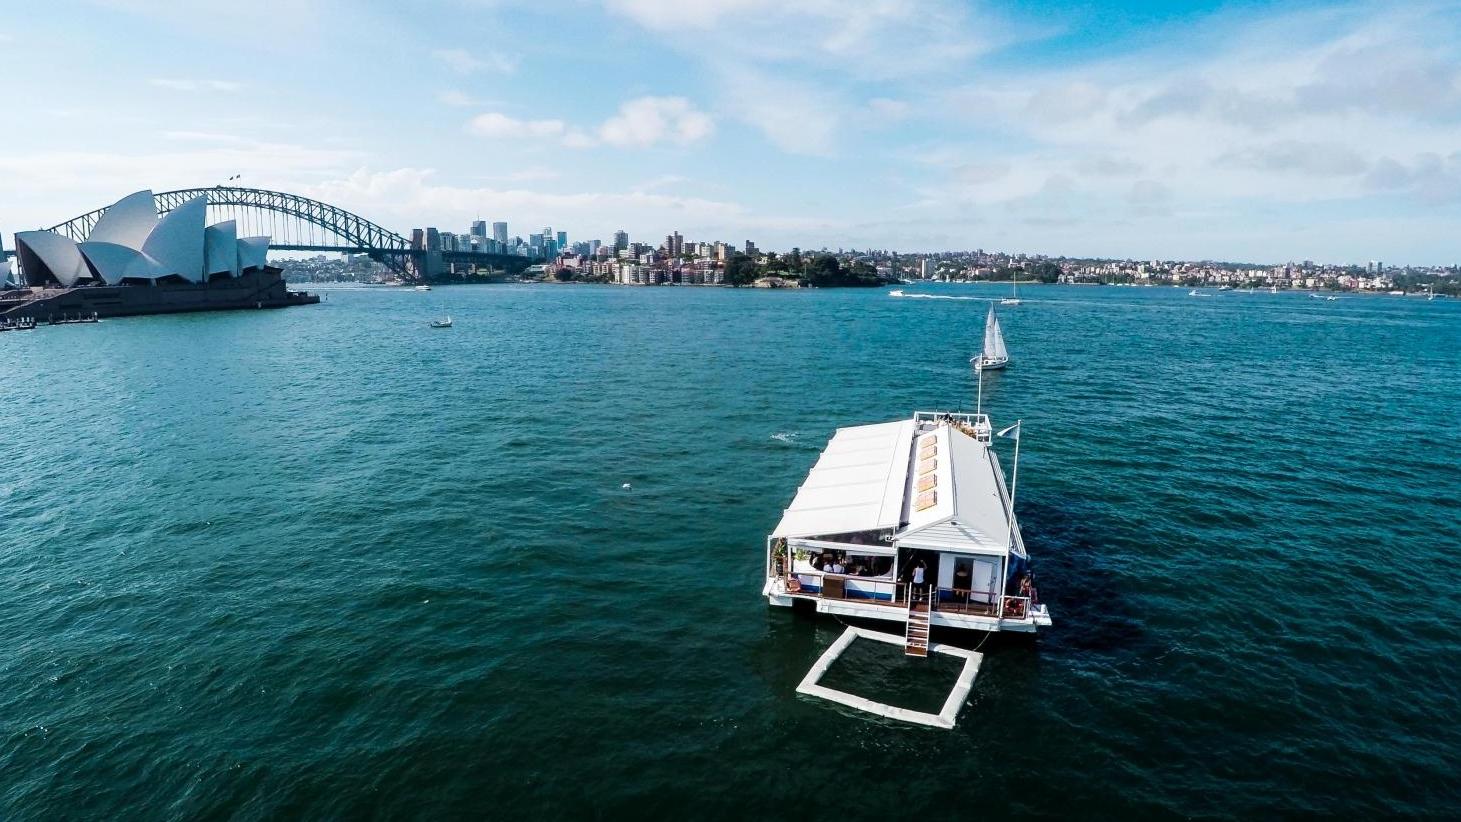 Waterfront Venues for Hire in Sydney